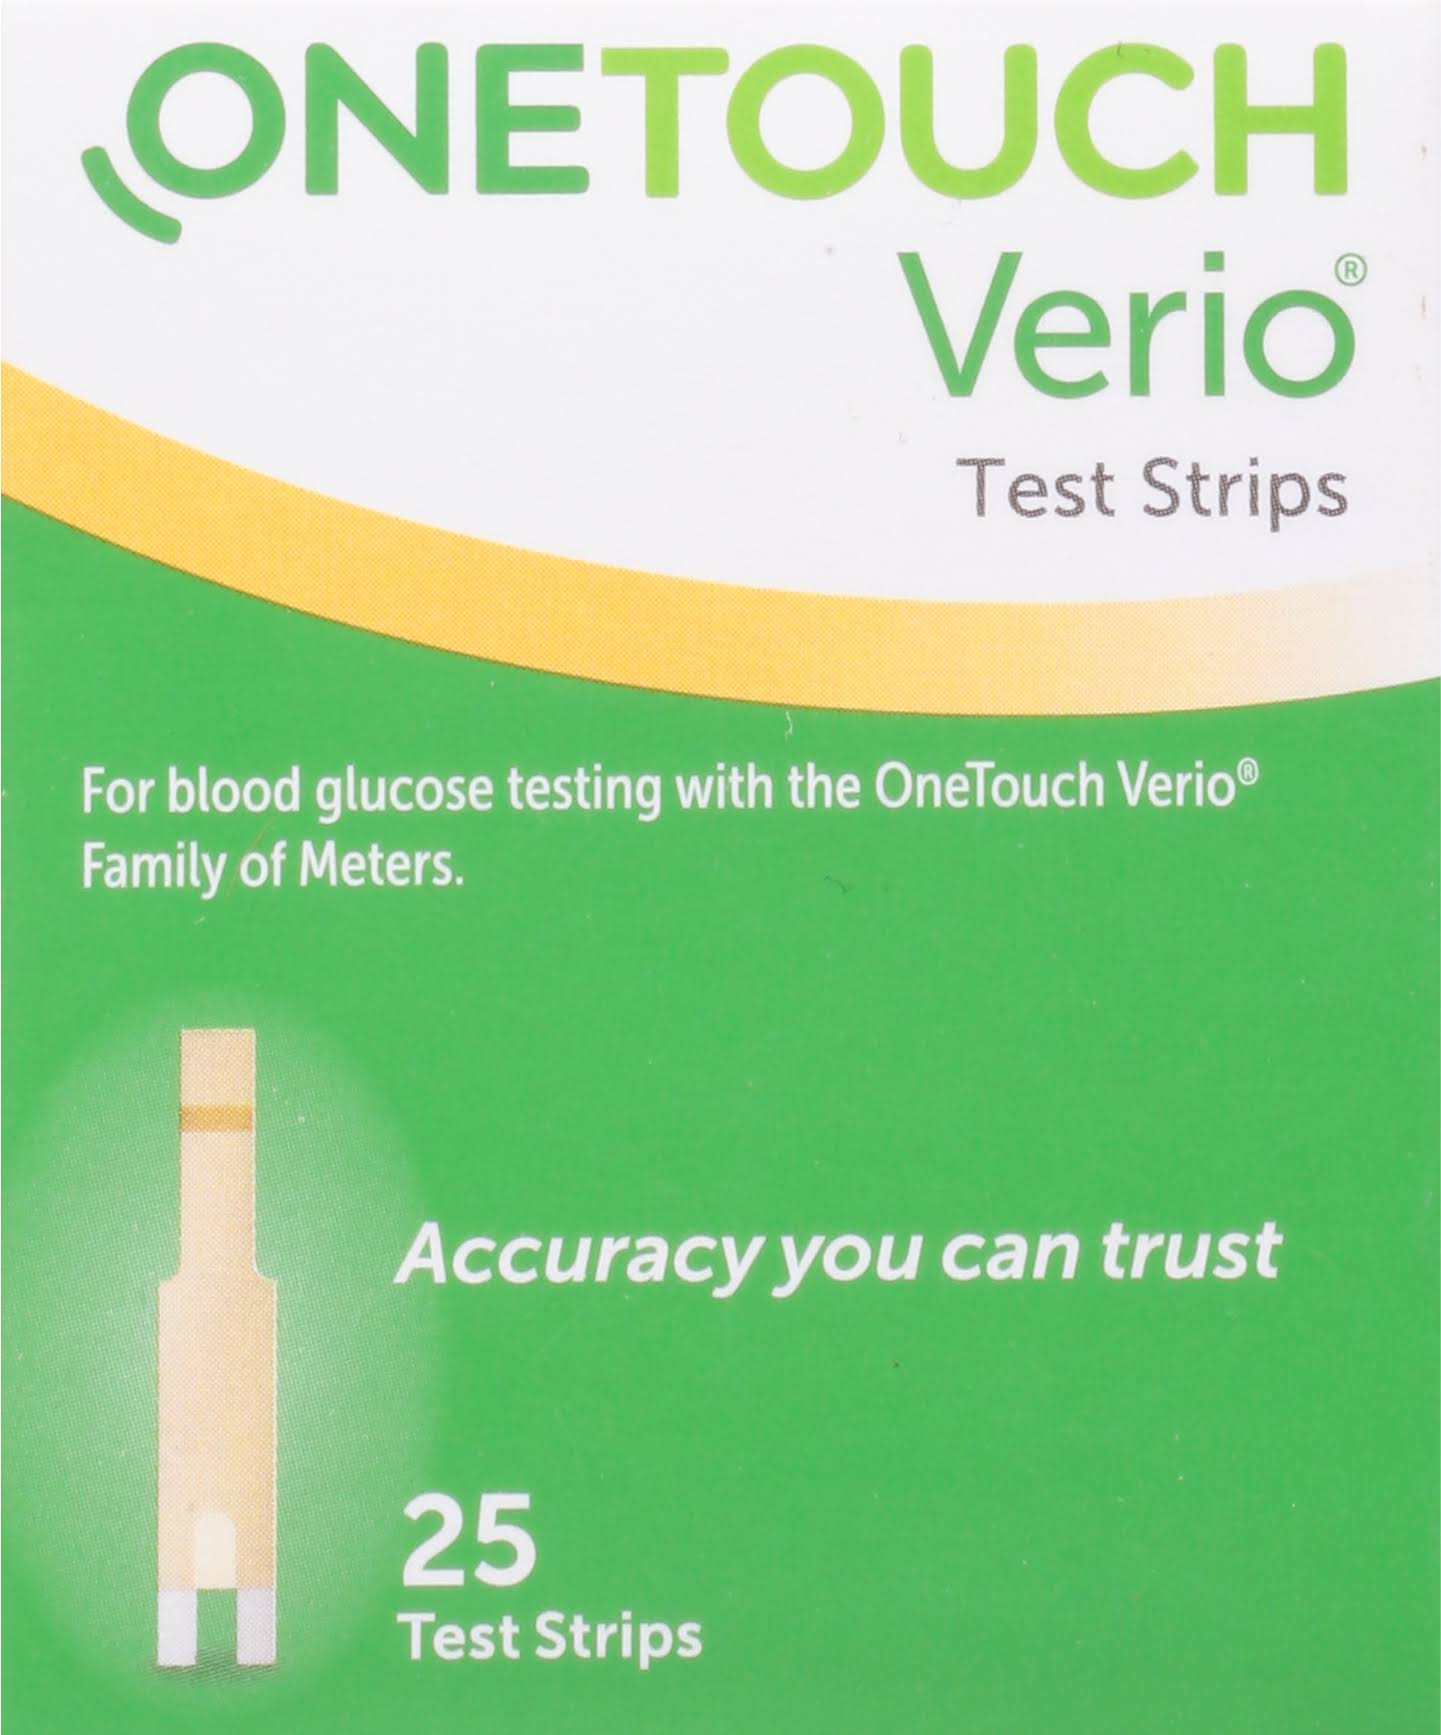 One Touch Verio Blood Glucose Test Strips - 25pk